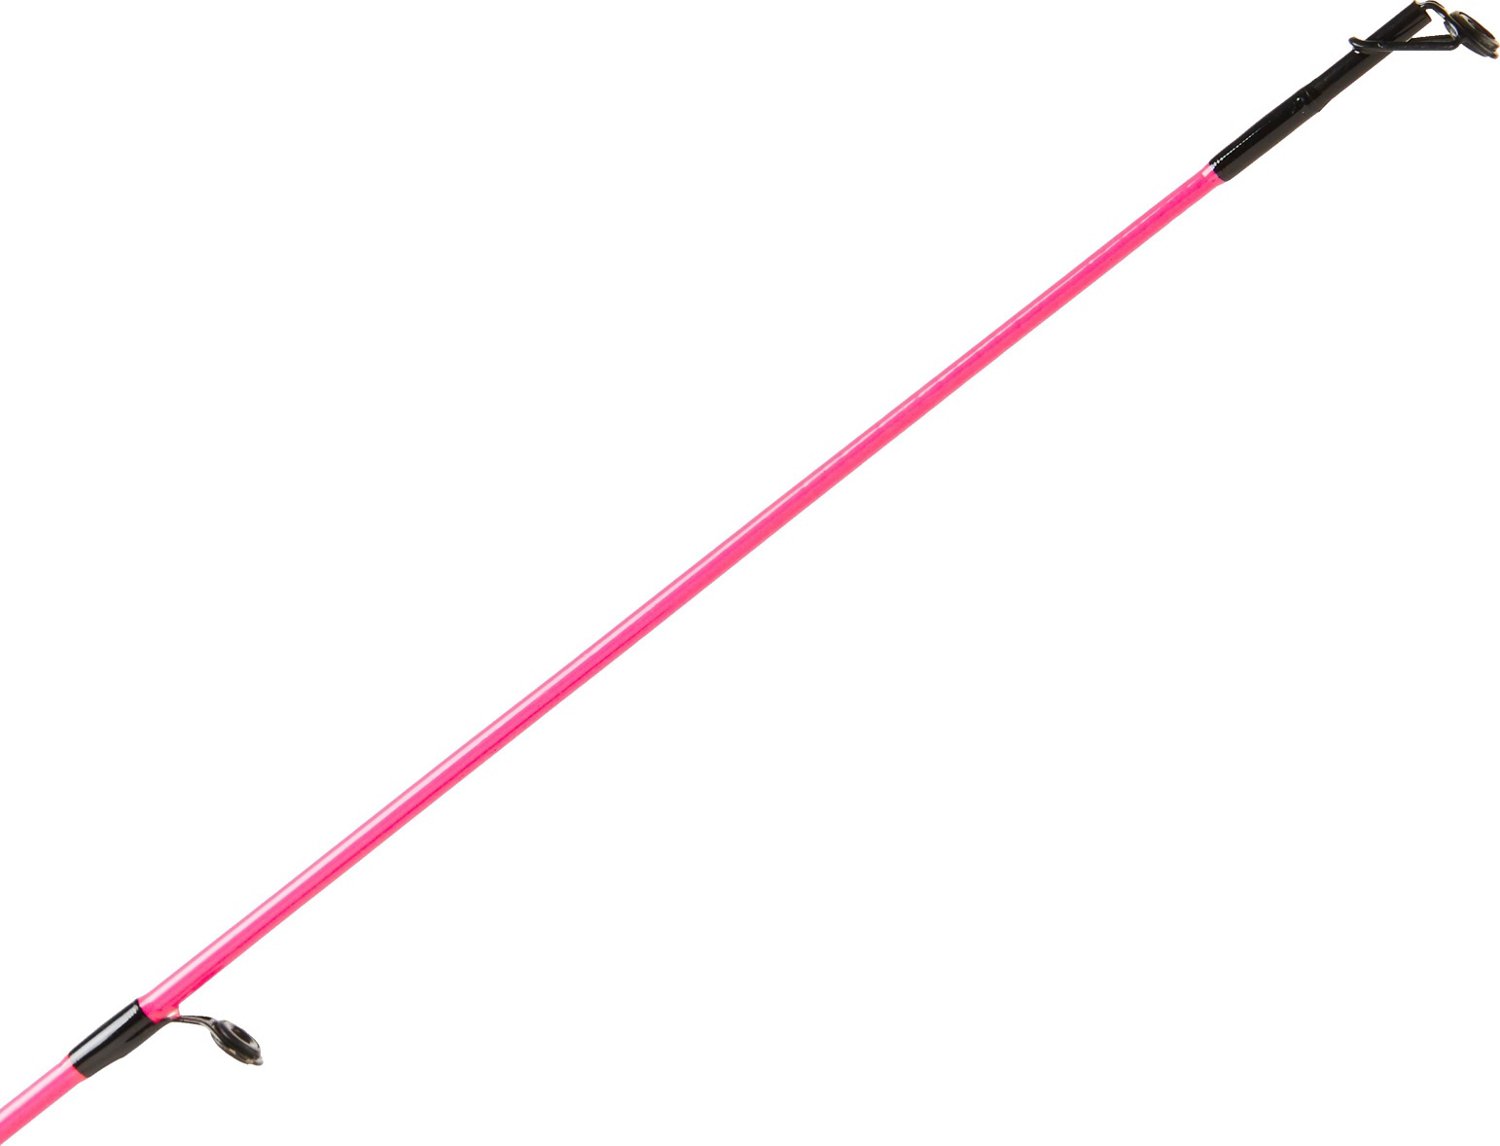 My fishing pole terry got me over the summer! Zebco pink rod